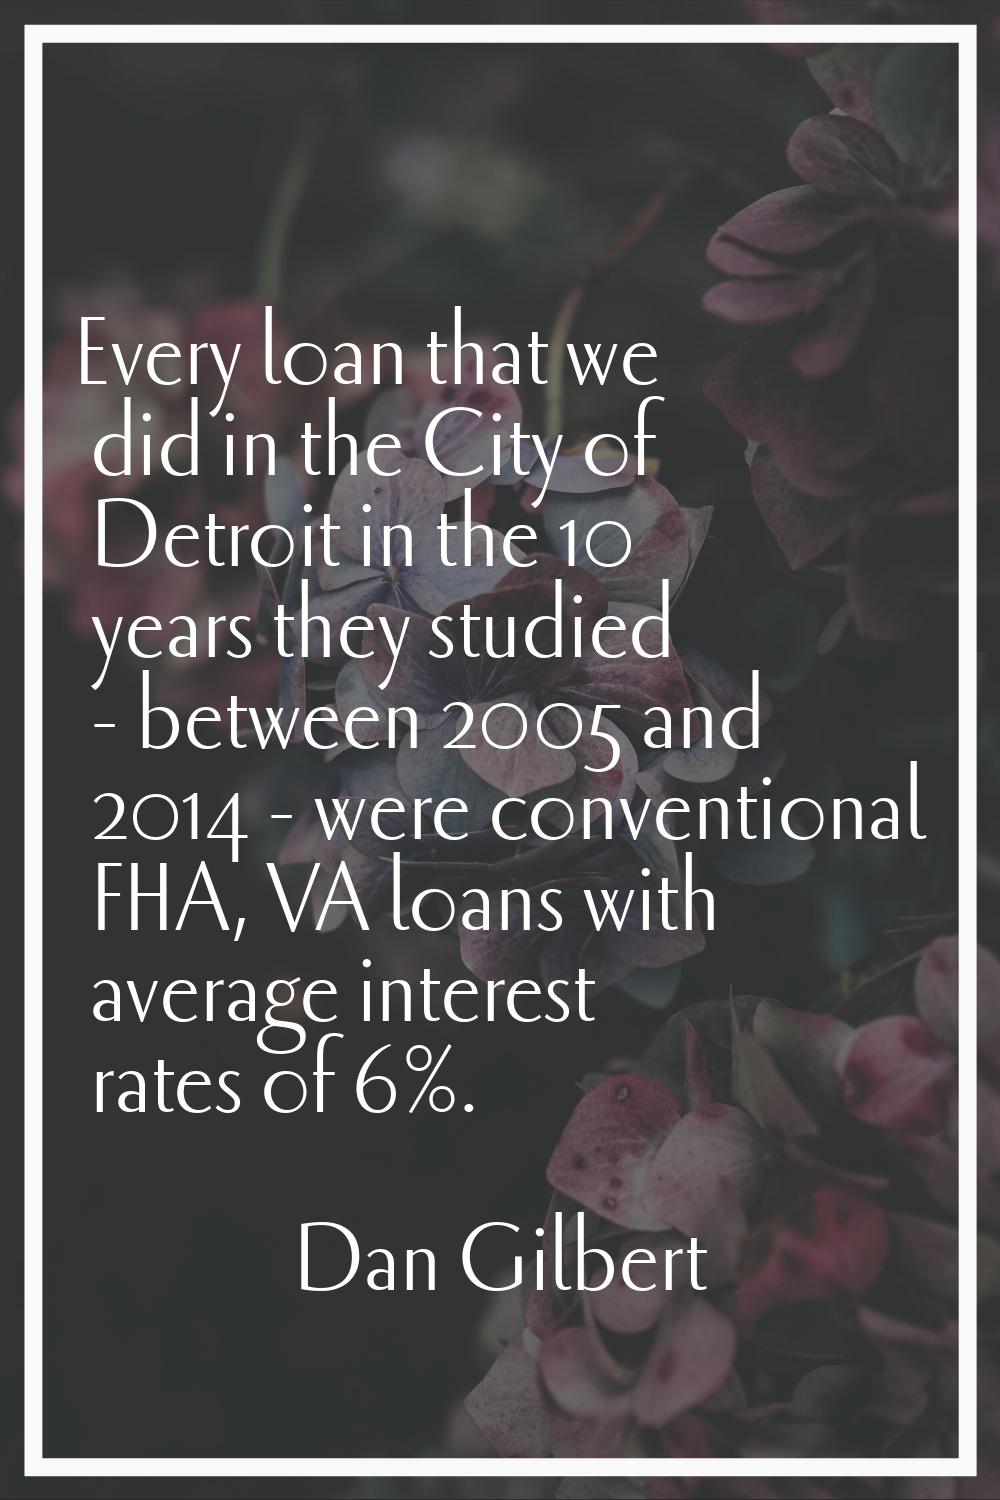 Every loan that we did in the City of Detroit in the 10 years they studied - between 2005 and 2014 